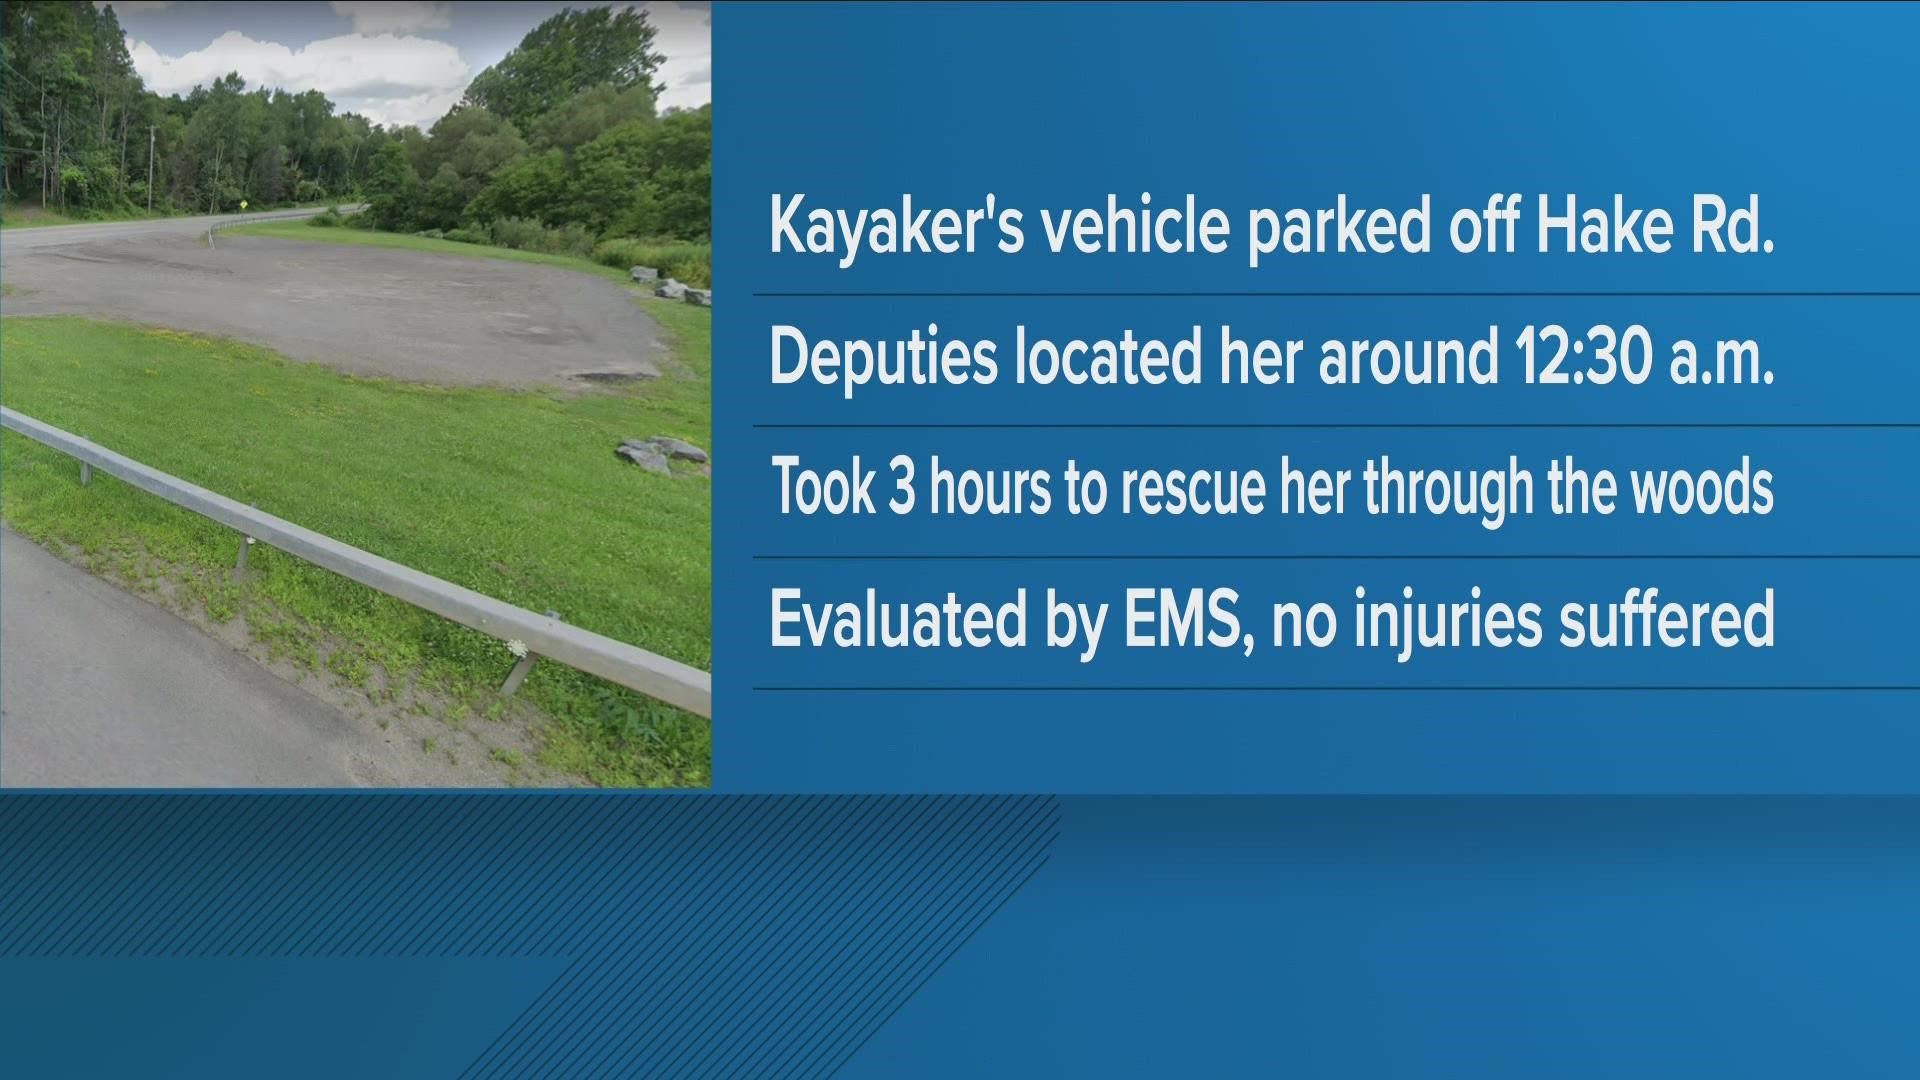 The female kayaker was found around 12:30 a.m., but treacherous conditions made the return difficult.